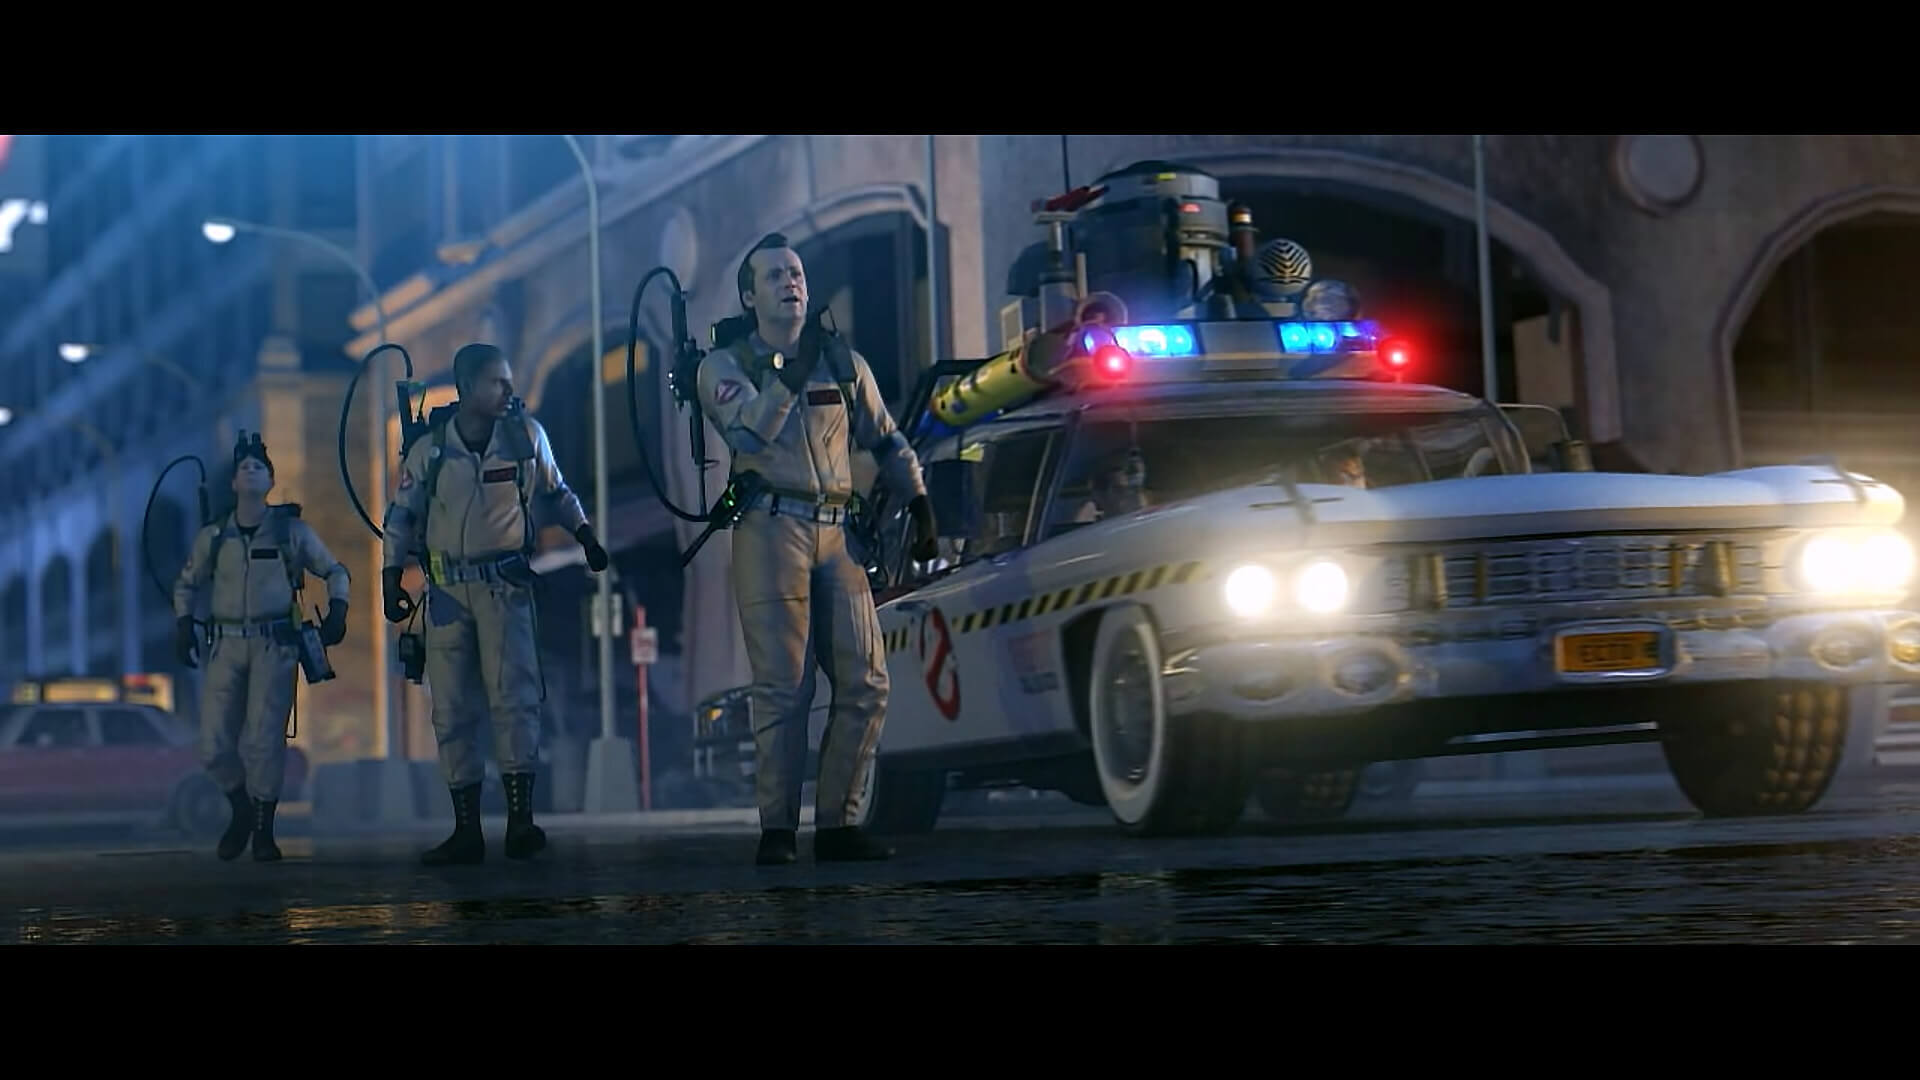 Diesel product ghostbusters the video game remastered home GBR GroupStream 1920x1080 442da57836793cc6cc7db49b4bd94dfe4731746e